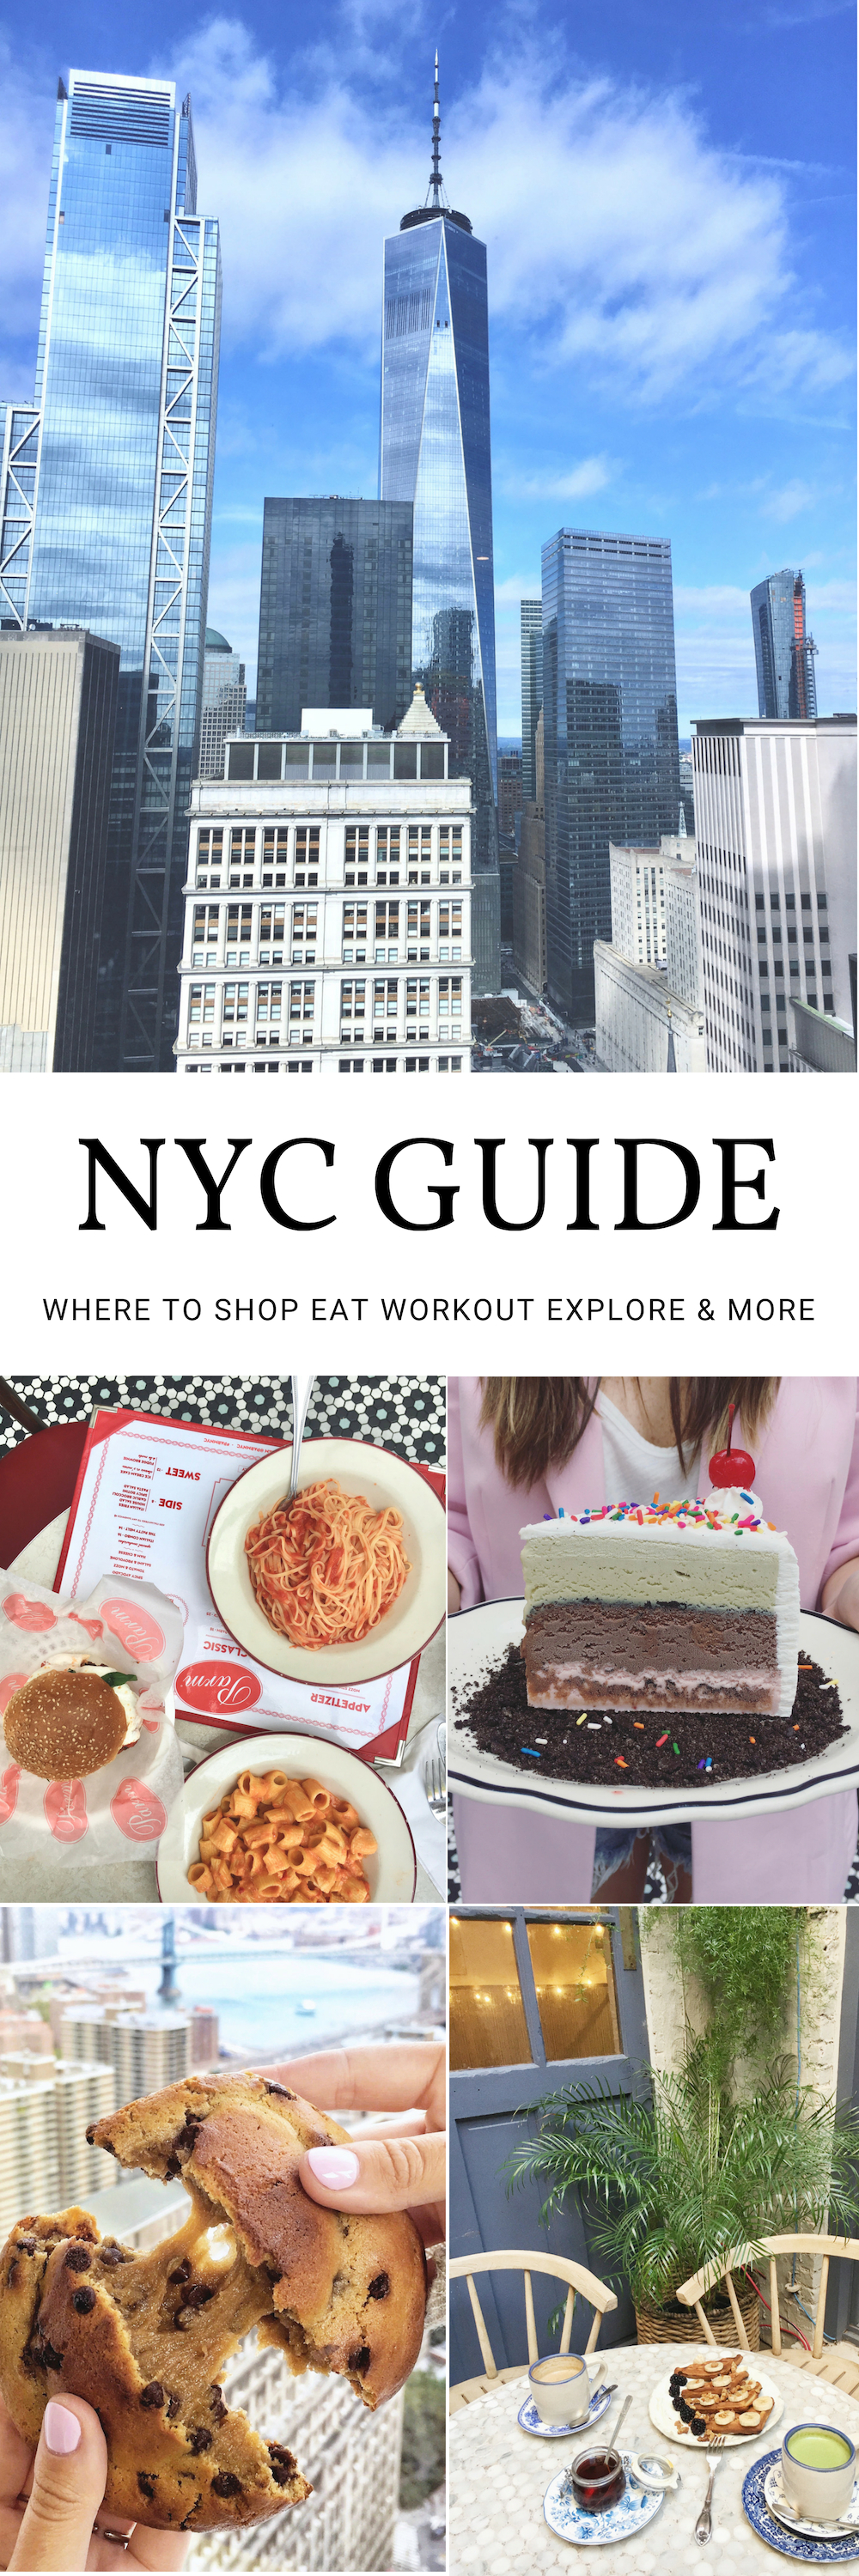 NYC GUIDE